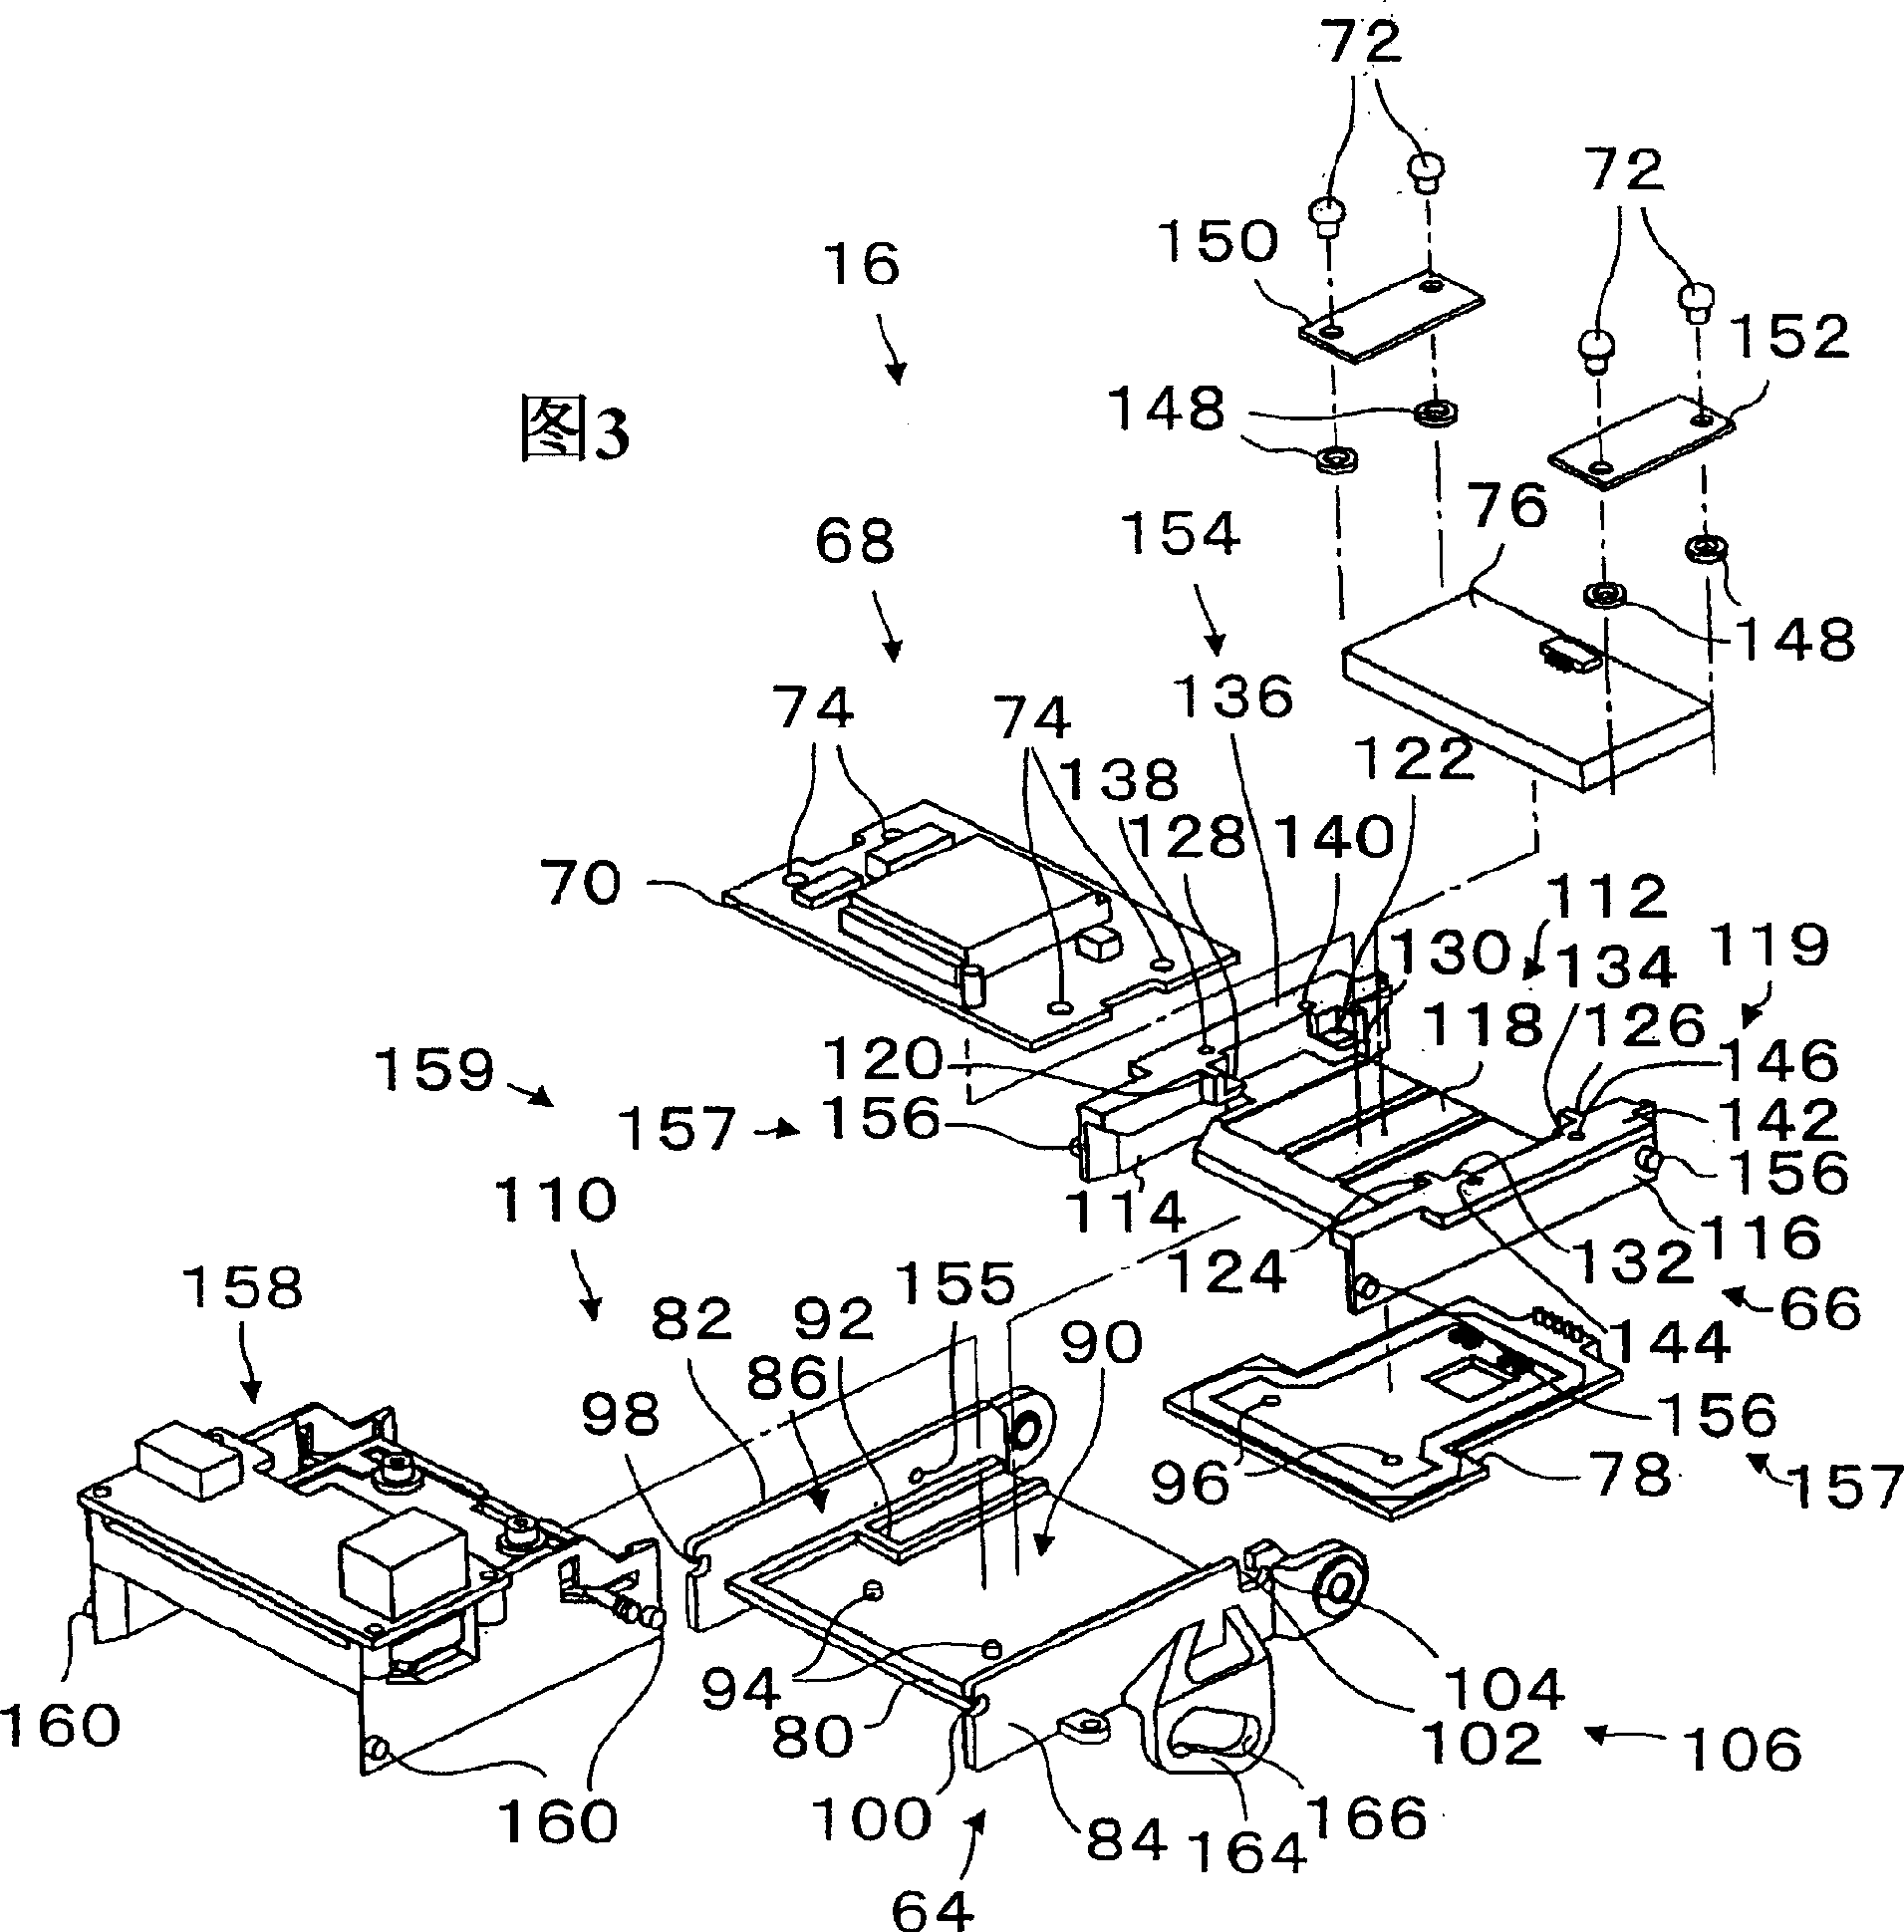 Communication base plate connection unit for smart card processing apparatus